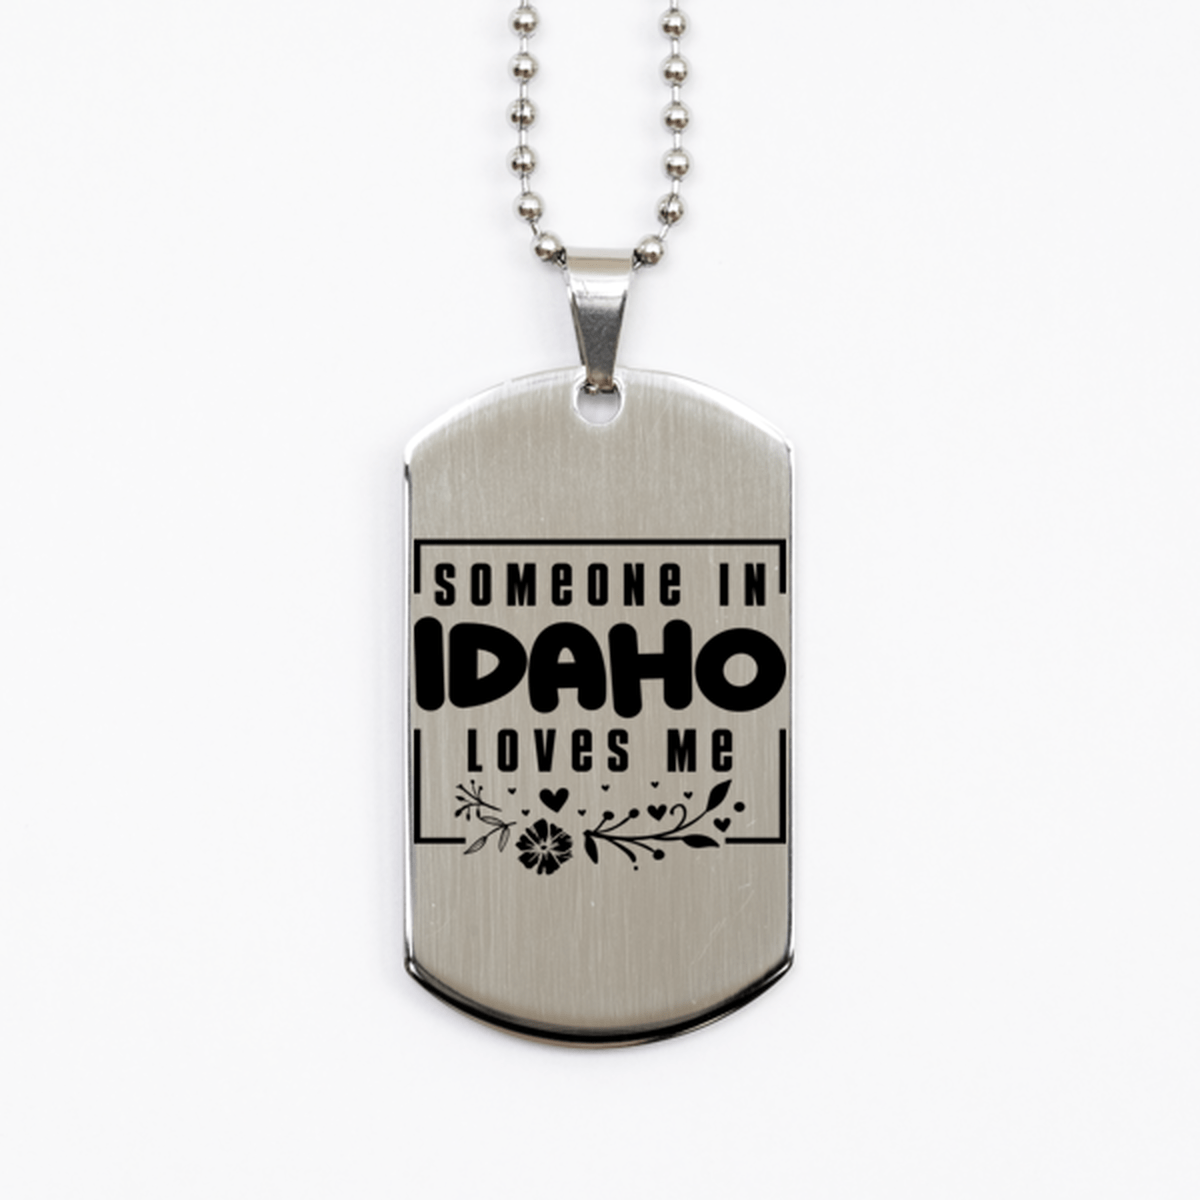 Cute Idaho Silver Dog Tag Necklace, Someone in Idaho Loves Me, Best Birthday Gifts from Idaho Friends & Family